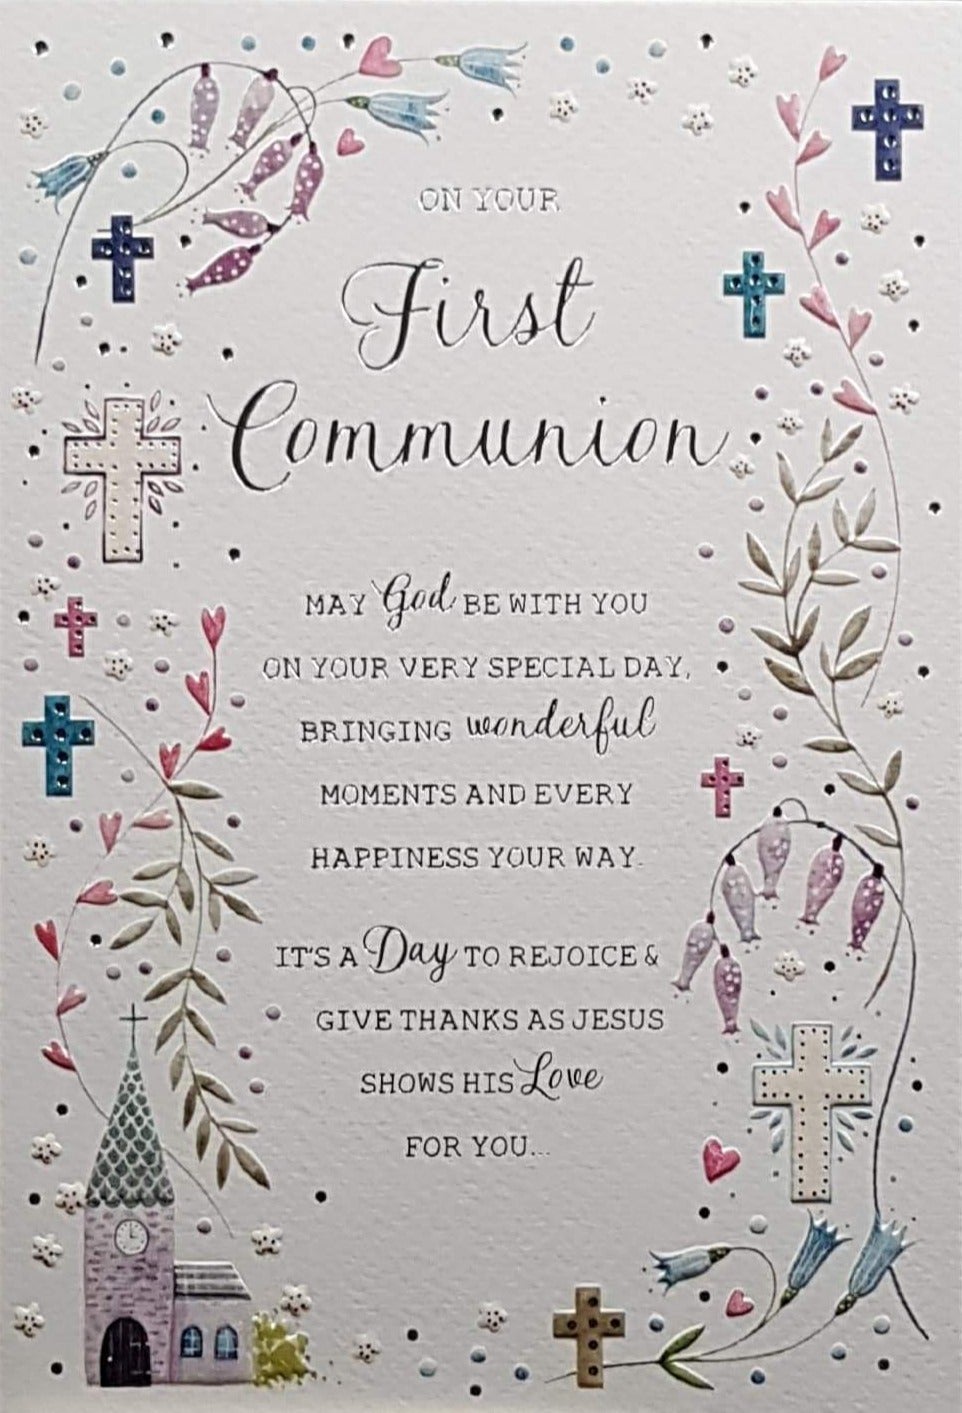 Communion Card - Gender Neutral - On Your First Communion & Church & Colourful Floral Border